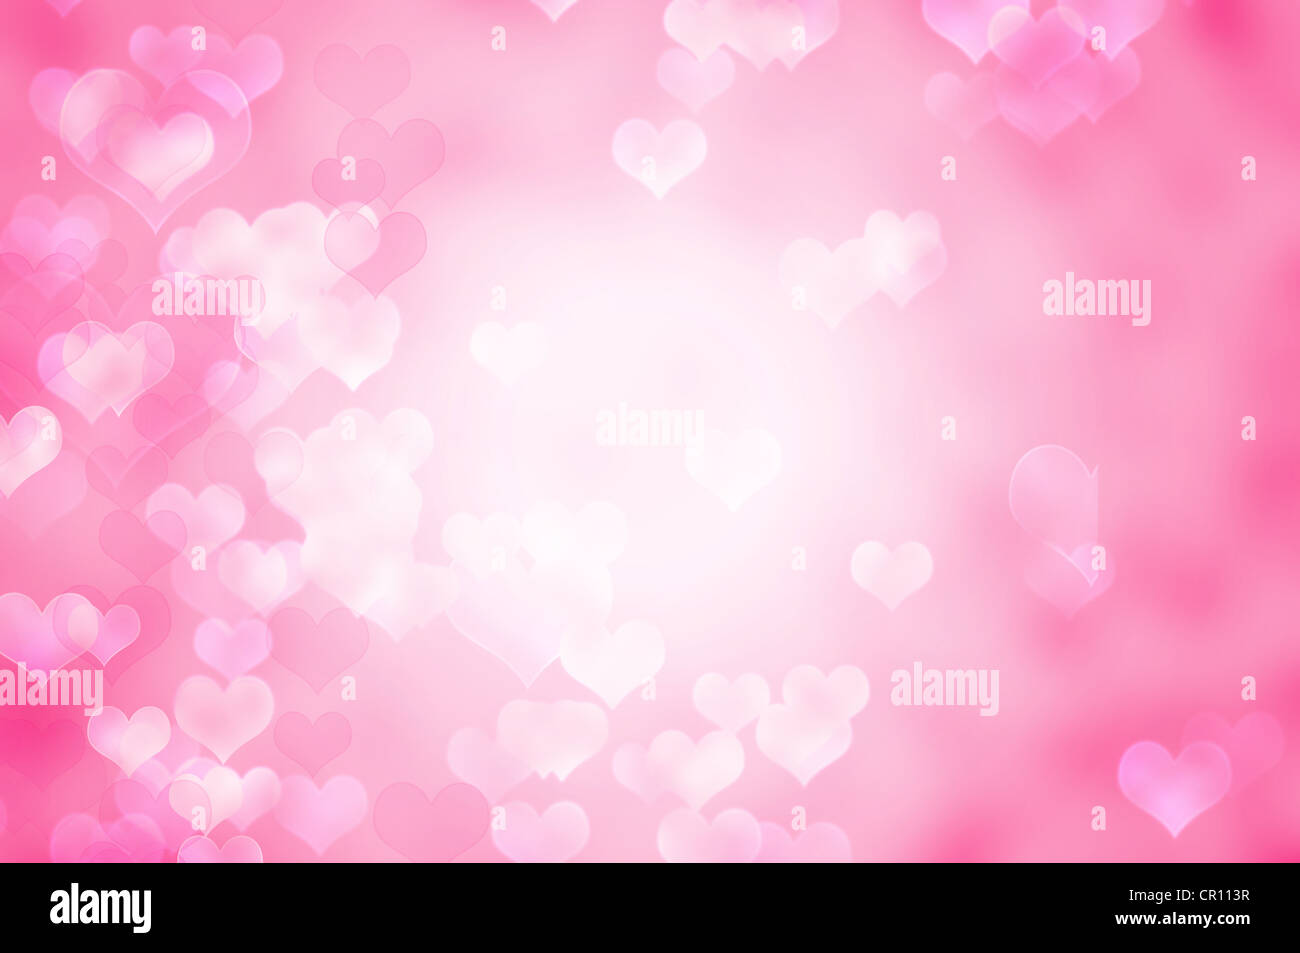 Beautiful abstract pink romantic background with hearts stock photo